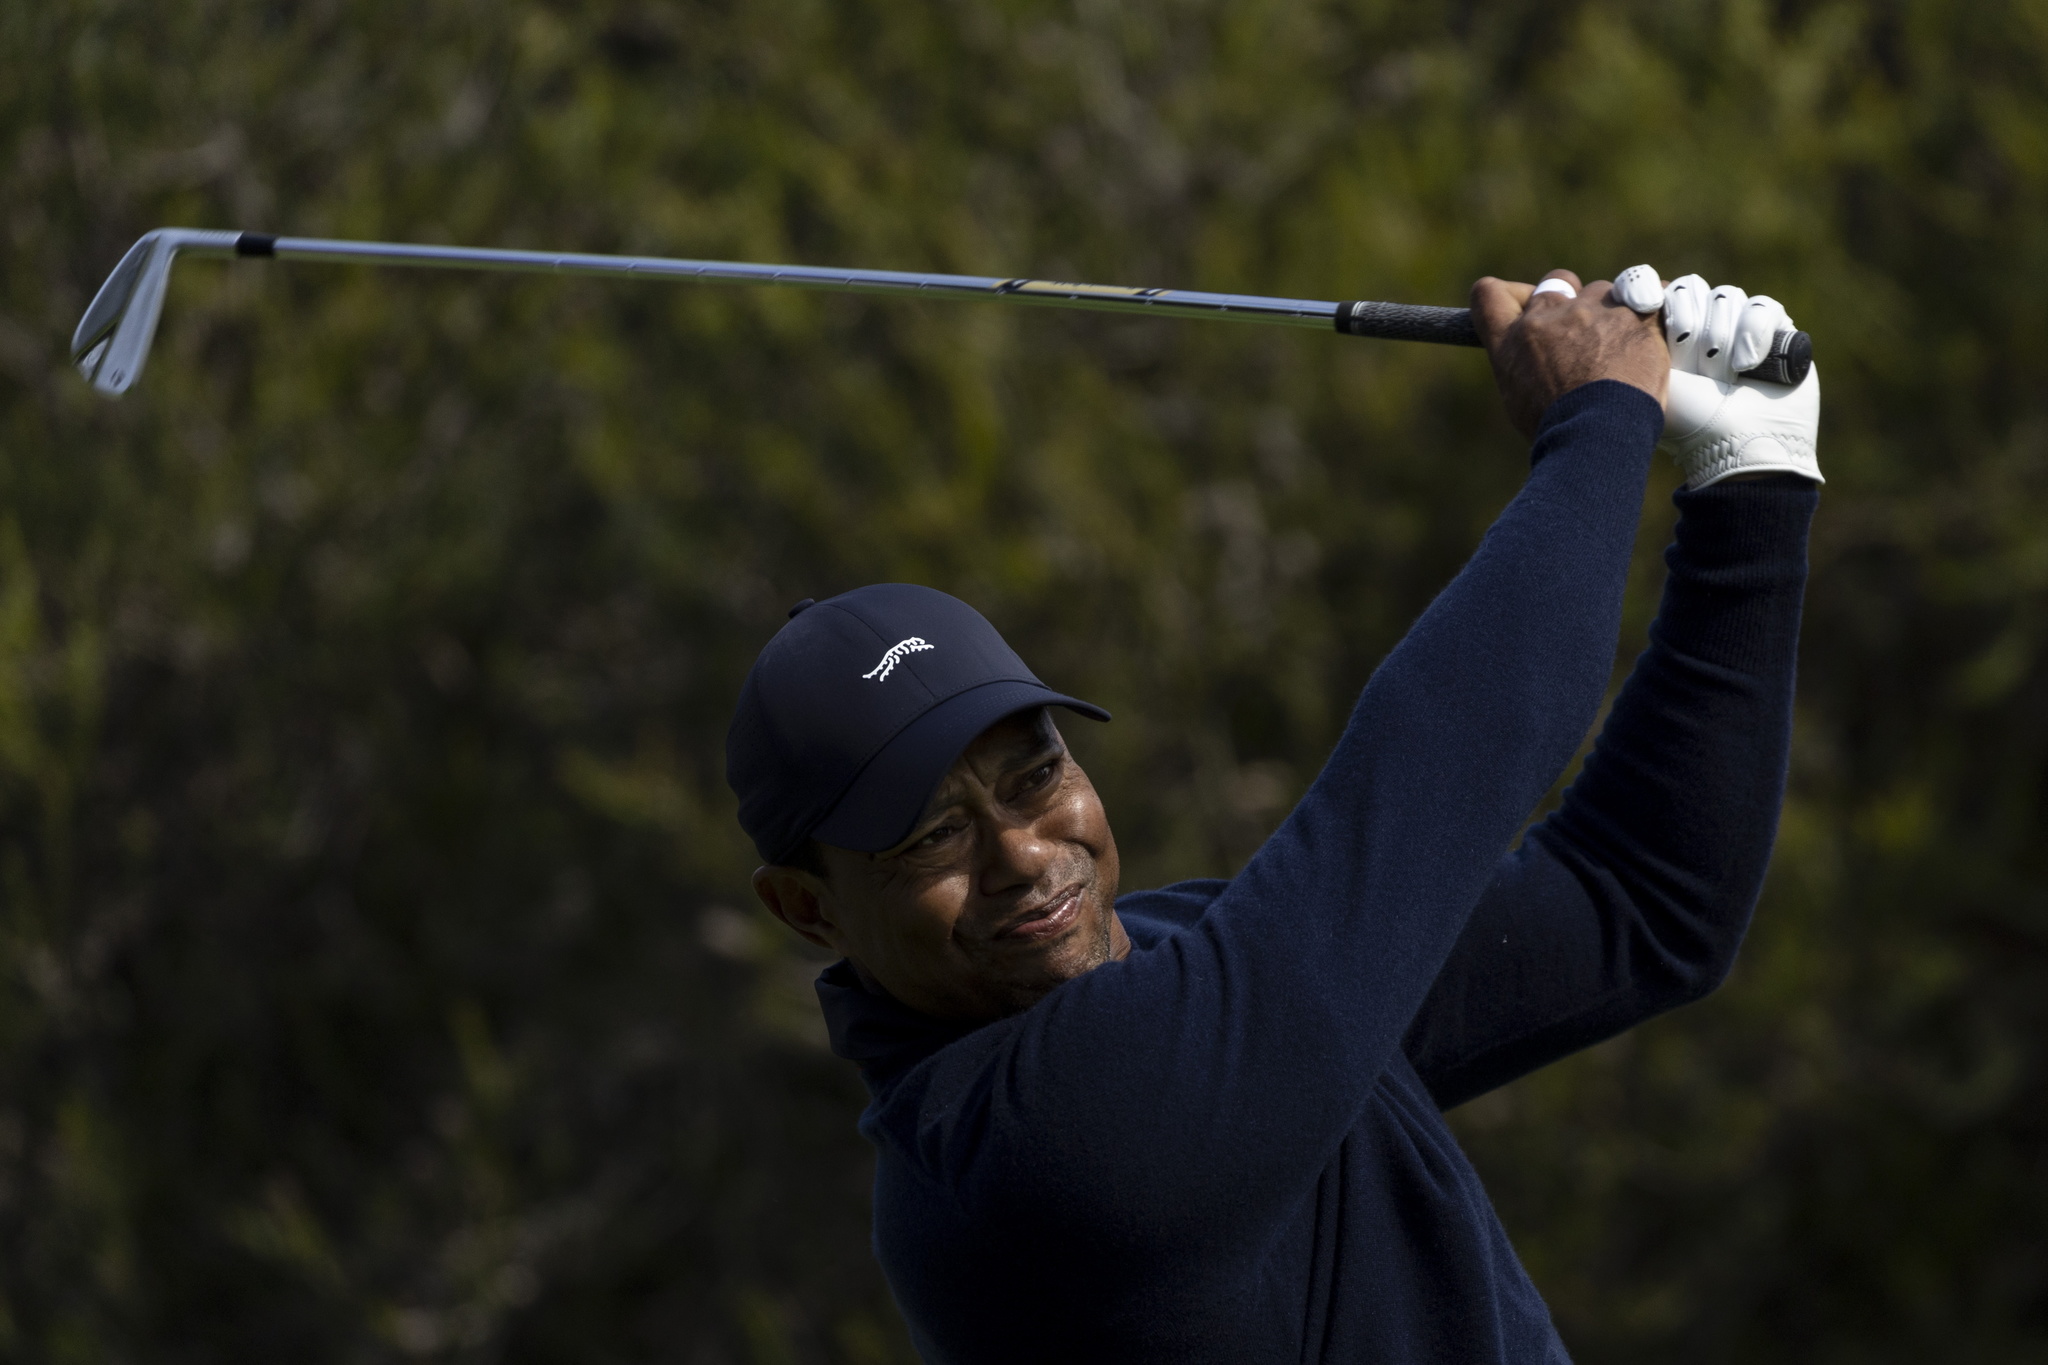 Tiger Woods in action